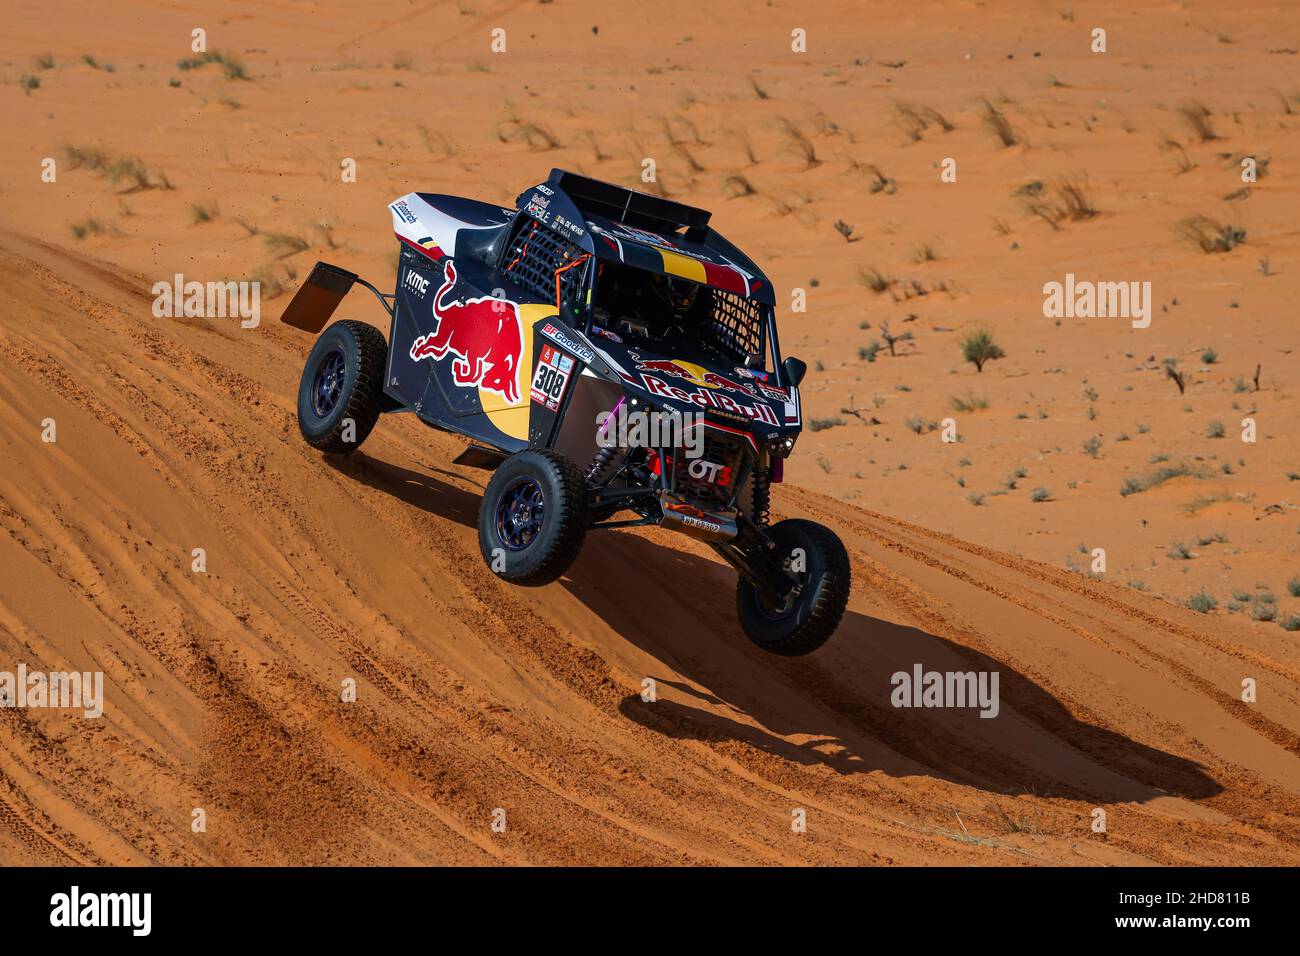 4th January 2022, Saudi Arabia. 308 De Mevius Guillaume (bel), Walch Kellon, Red Bull Off-Road Junior Team, OT3 - 04, T3 FIA, W2RC, action during the Stage 3 of the Dakar Rally 2022 between Al Qaysumah and Al Qaysumah, on January 4th 2022 in Al Qaysumah, Saudi Arabia - Photo: Florent Gooden/DPPI/LiveMedia Credit: Independent Photo Agency/Alamy Live News Stock Photo